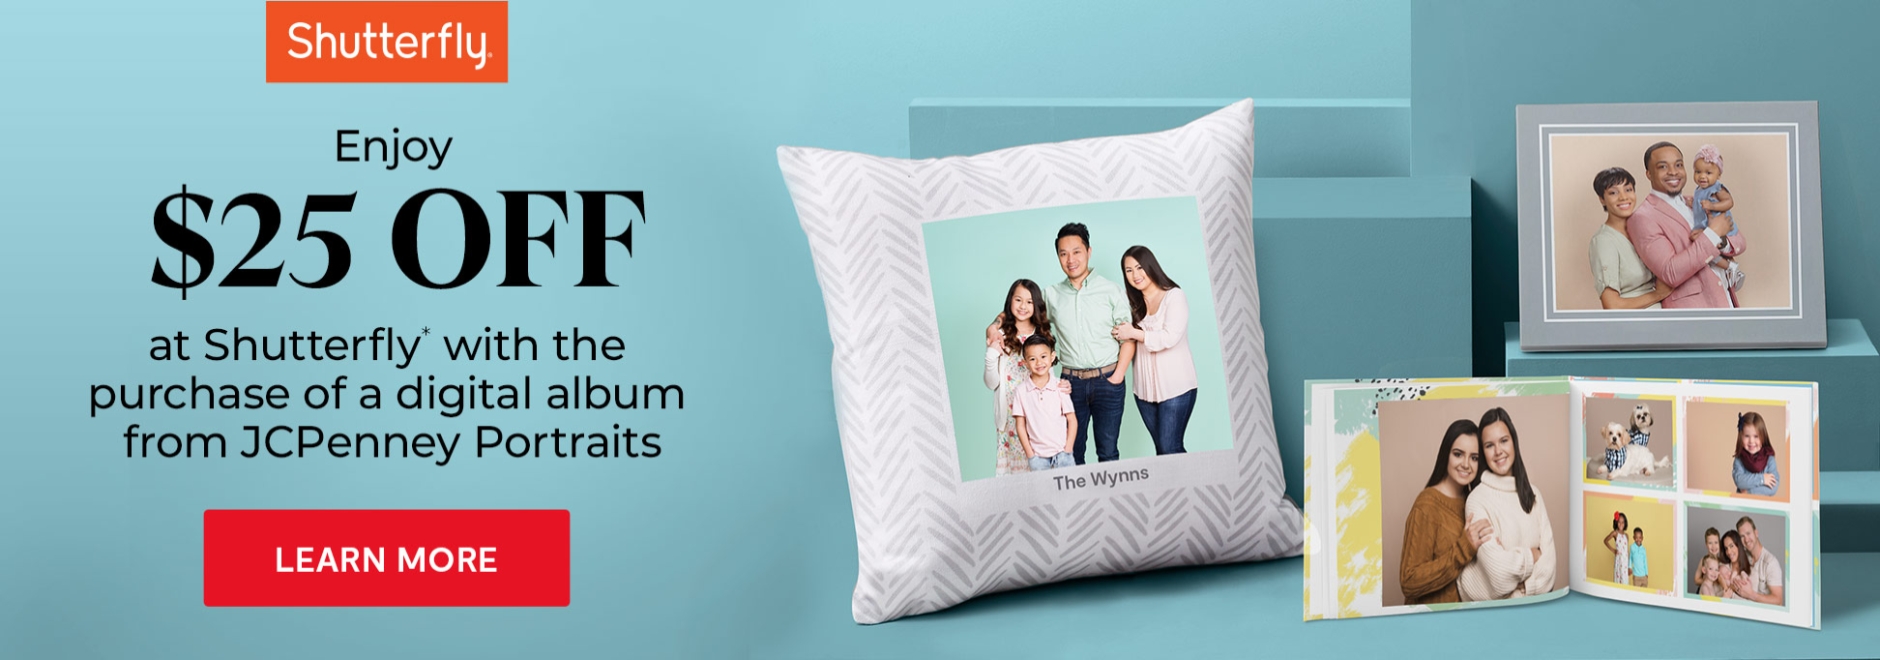 Enjoy this special offer from Shutterfly!